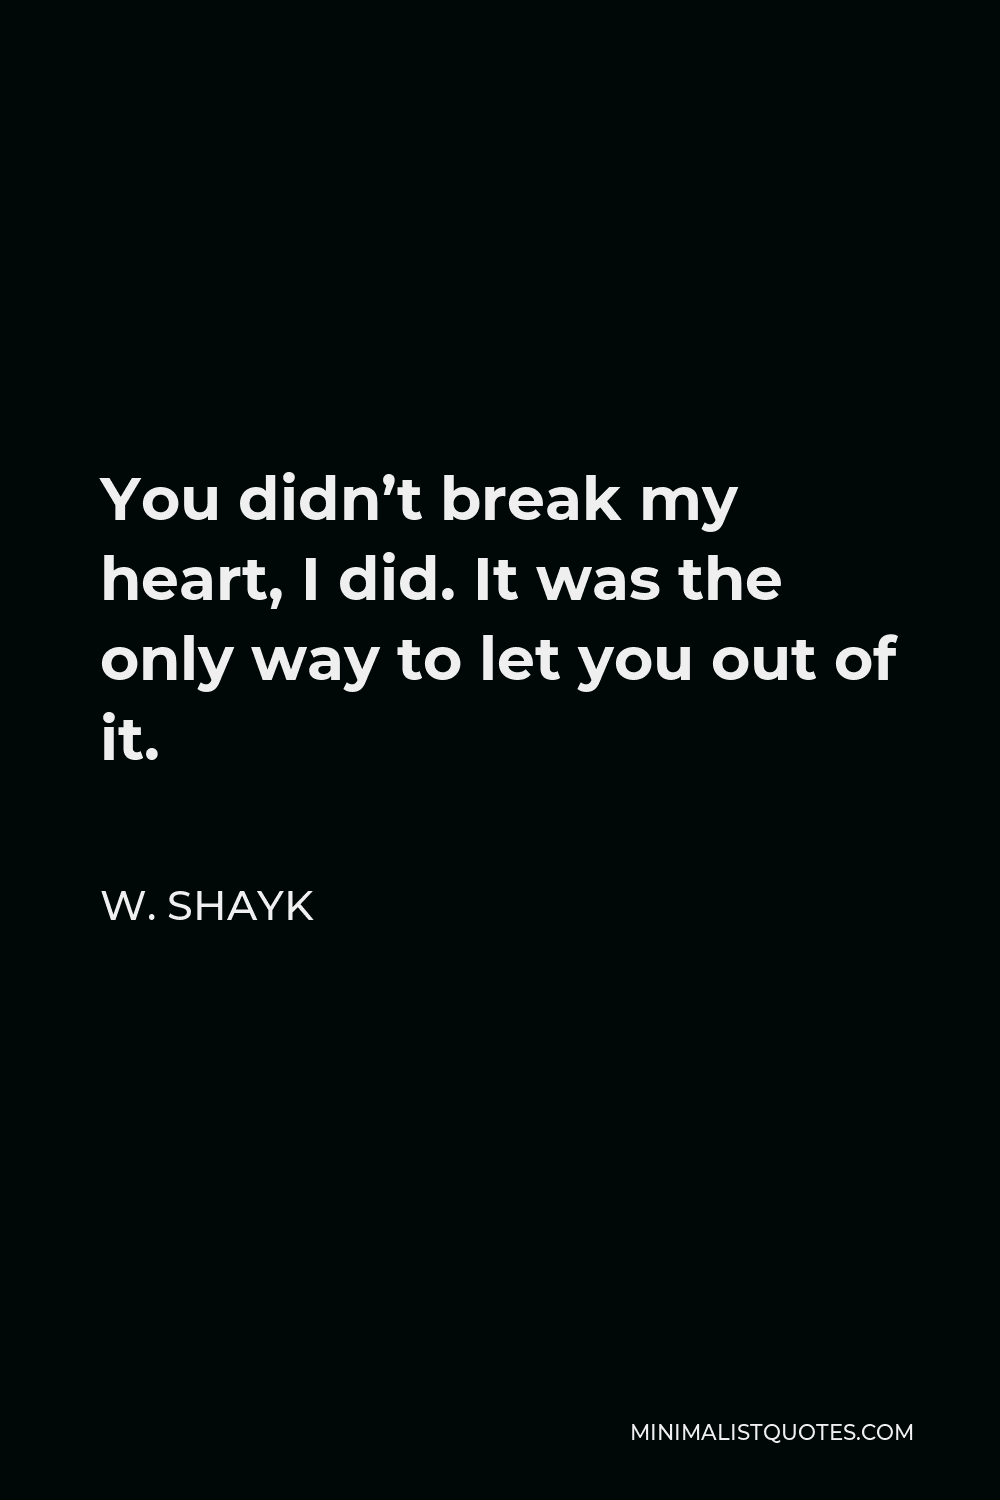 W. Shayk Quote - You didn’t break my heart, I did. It was the only way to let you out of it.